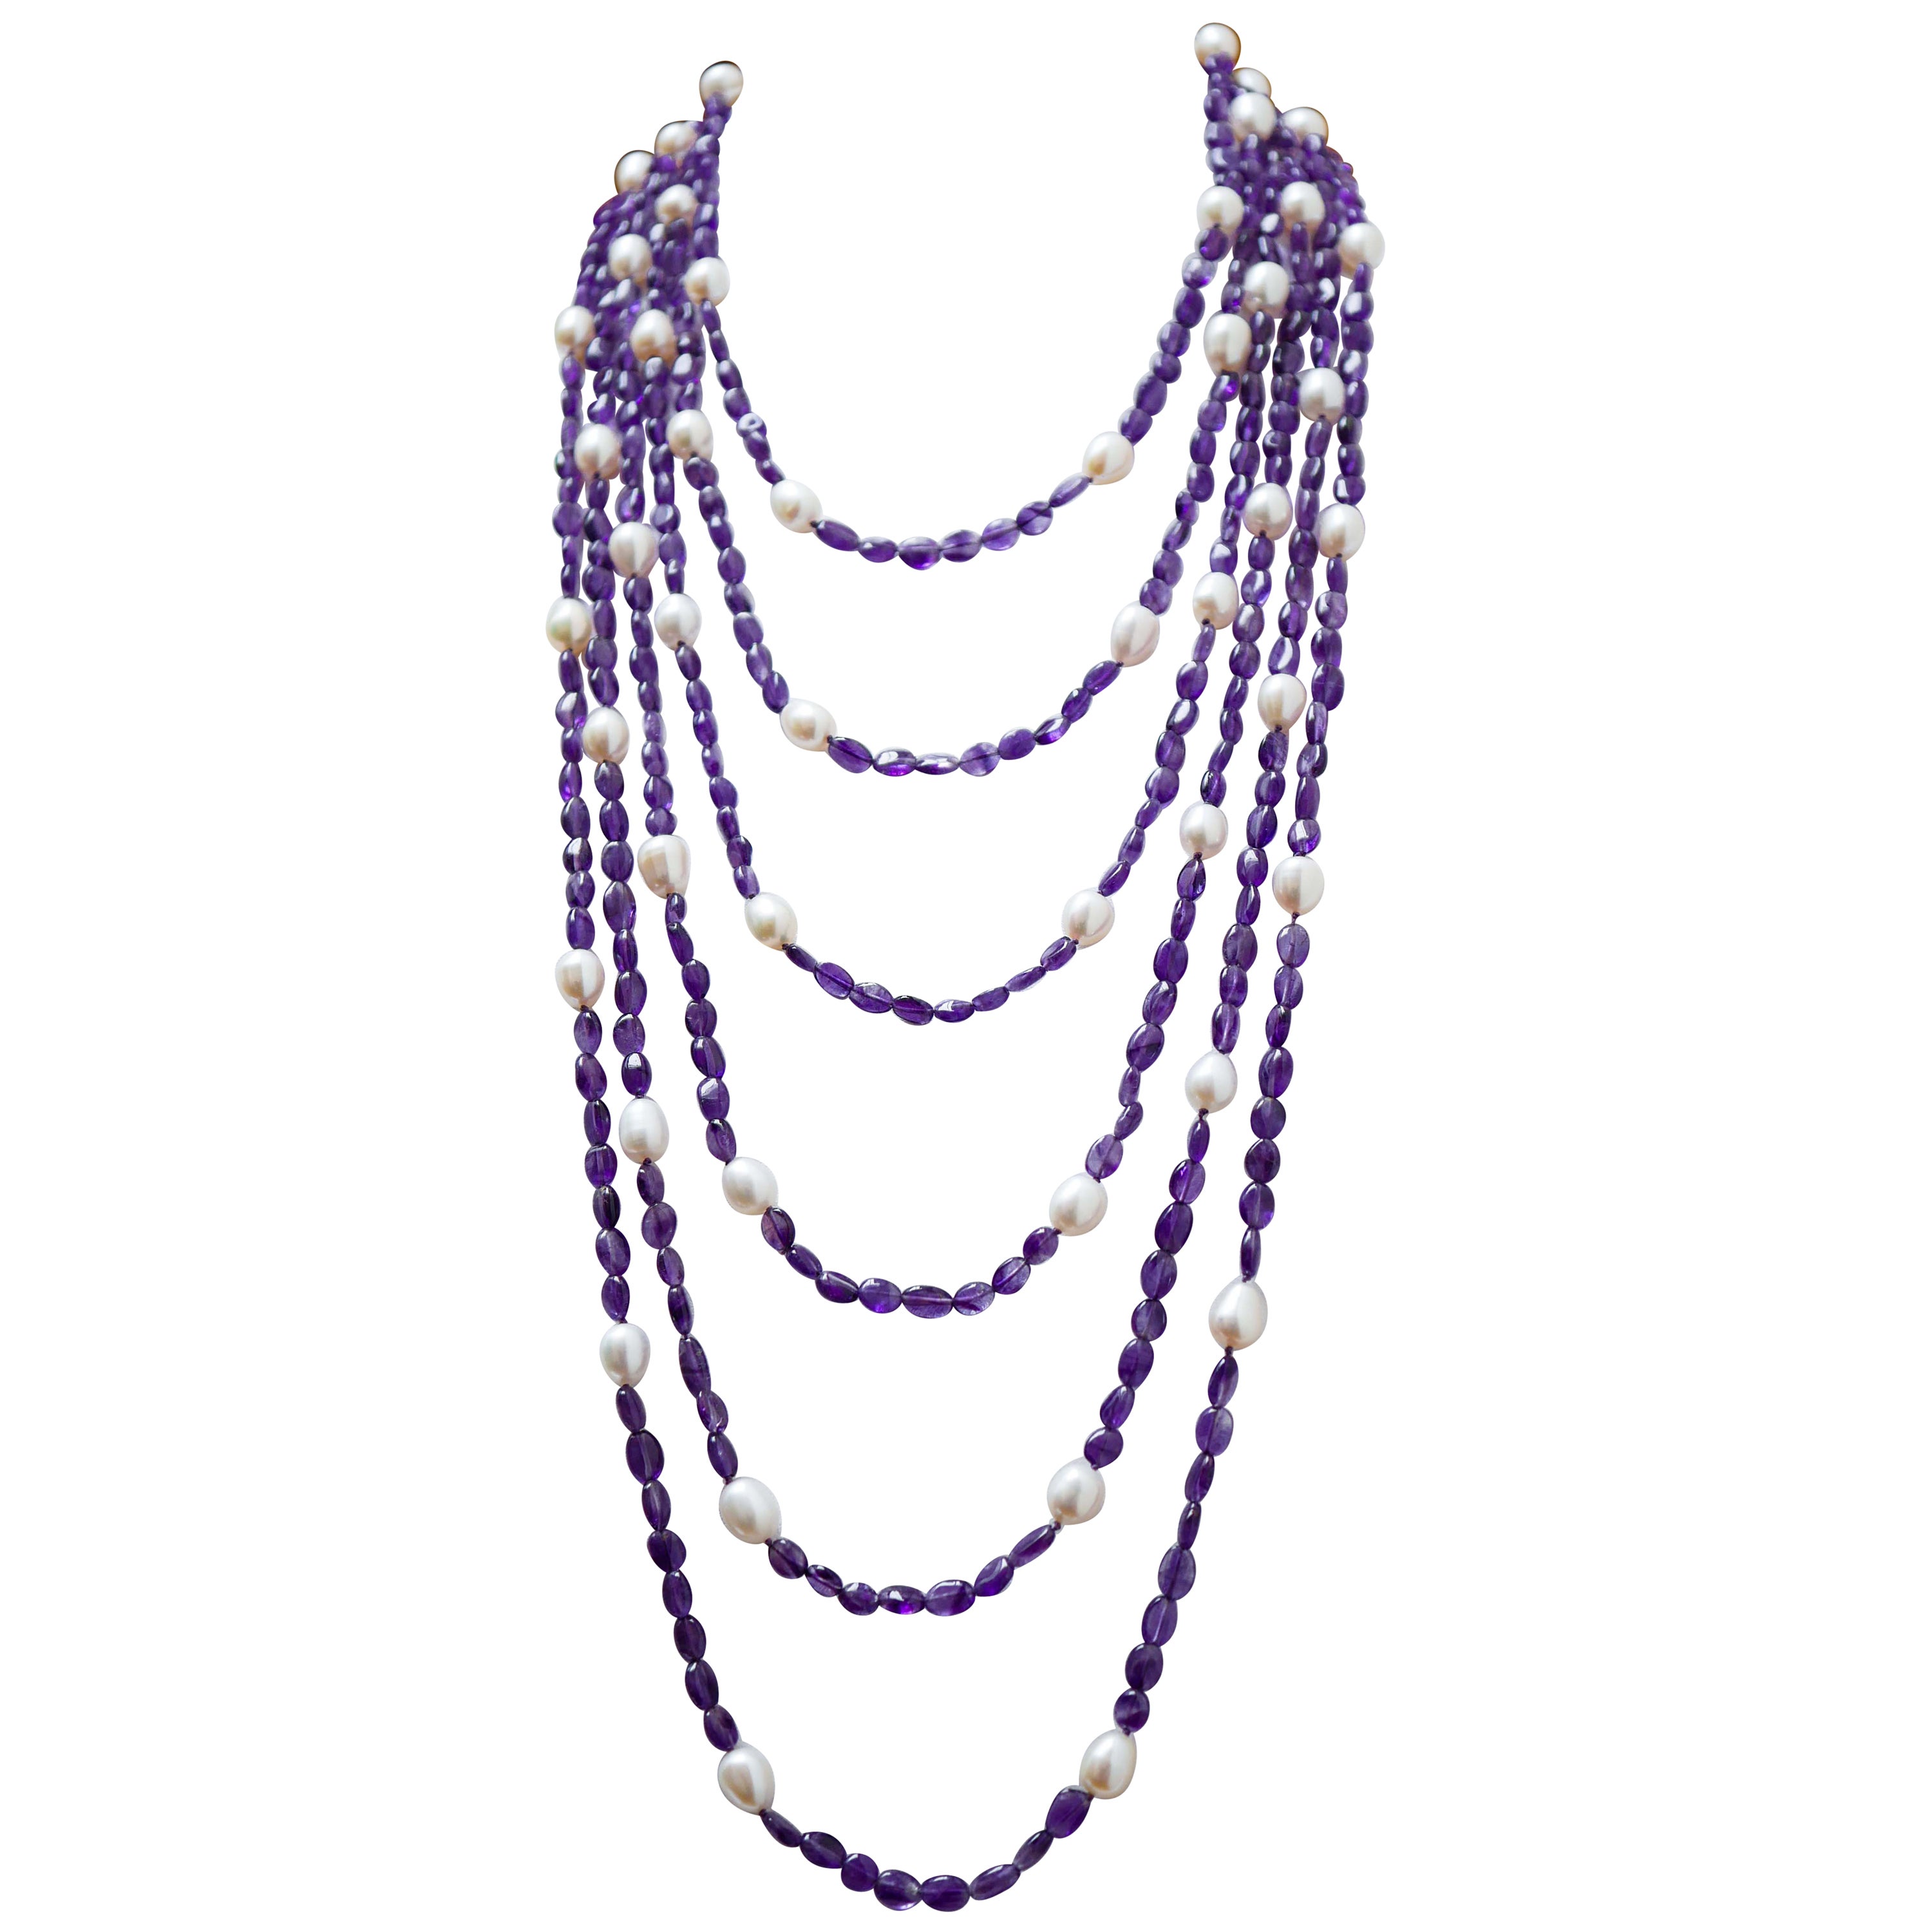 Amethysts, Pearls, Multi-Strands Necklace. For Sale